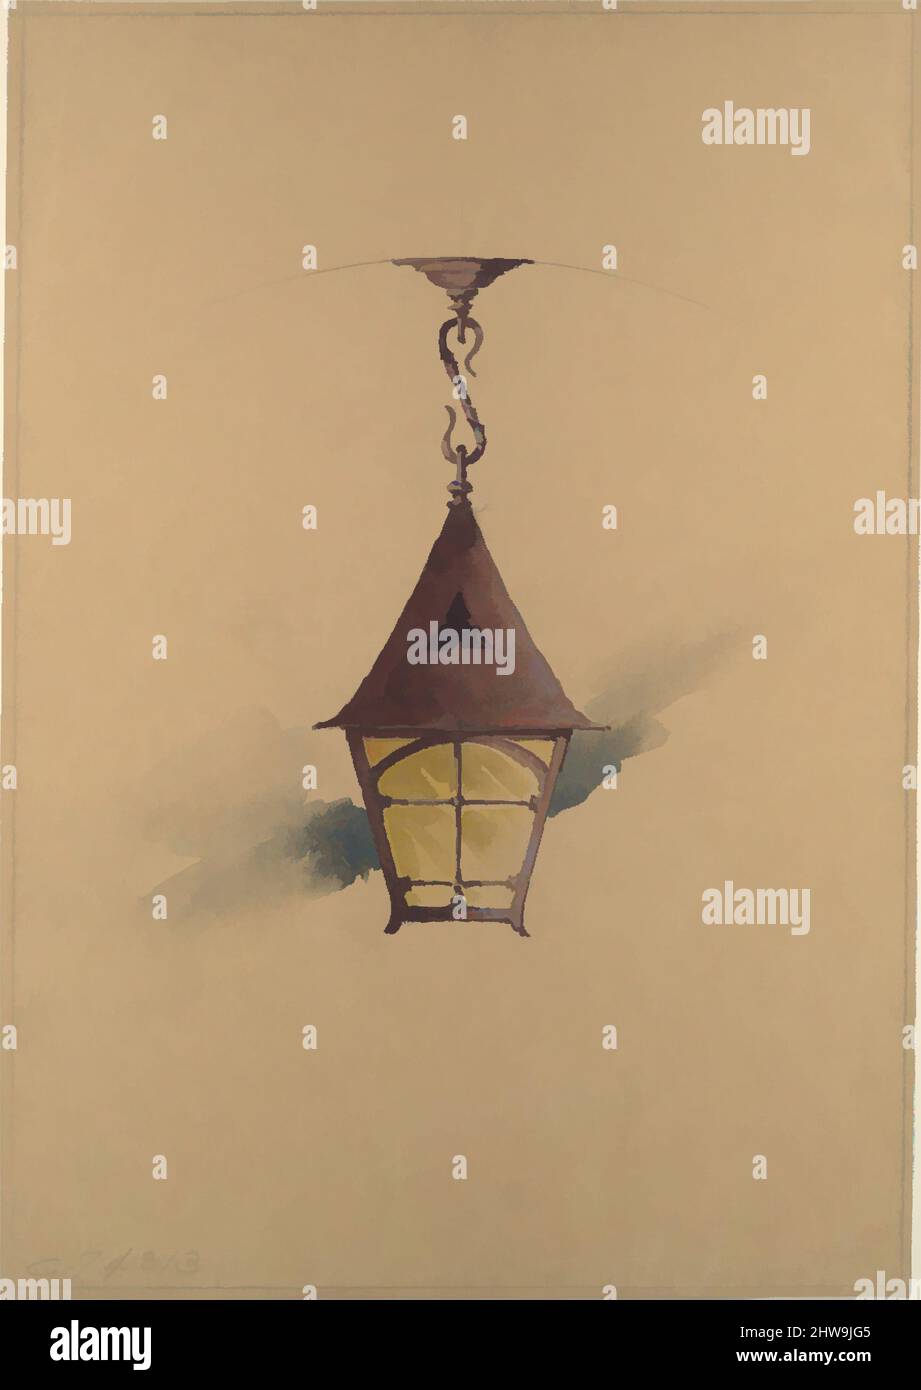 Art inspired by Design for hanging light fixture, late 19th–early 20th century, Made in New York, United States, American, Watercolor, colored pencil, and graphite on tan wove paper with vertical grain direction, Overall: 22 1/8 x 15 1/16 in. (56.3 x 38.3 cm), Drawings, Possibly, Classic works modernized by Artotop with a splash of modernity. Shapes, color and value, eye-catching visual impact on art. Emotions through freedom of artworks in a contemporary way. A timeless message pursuing a wildly creative new direction. Artists turning to the digital medium and creating the Artotop NFT Stock Photo